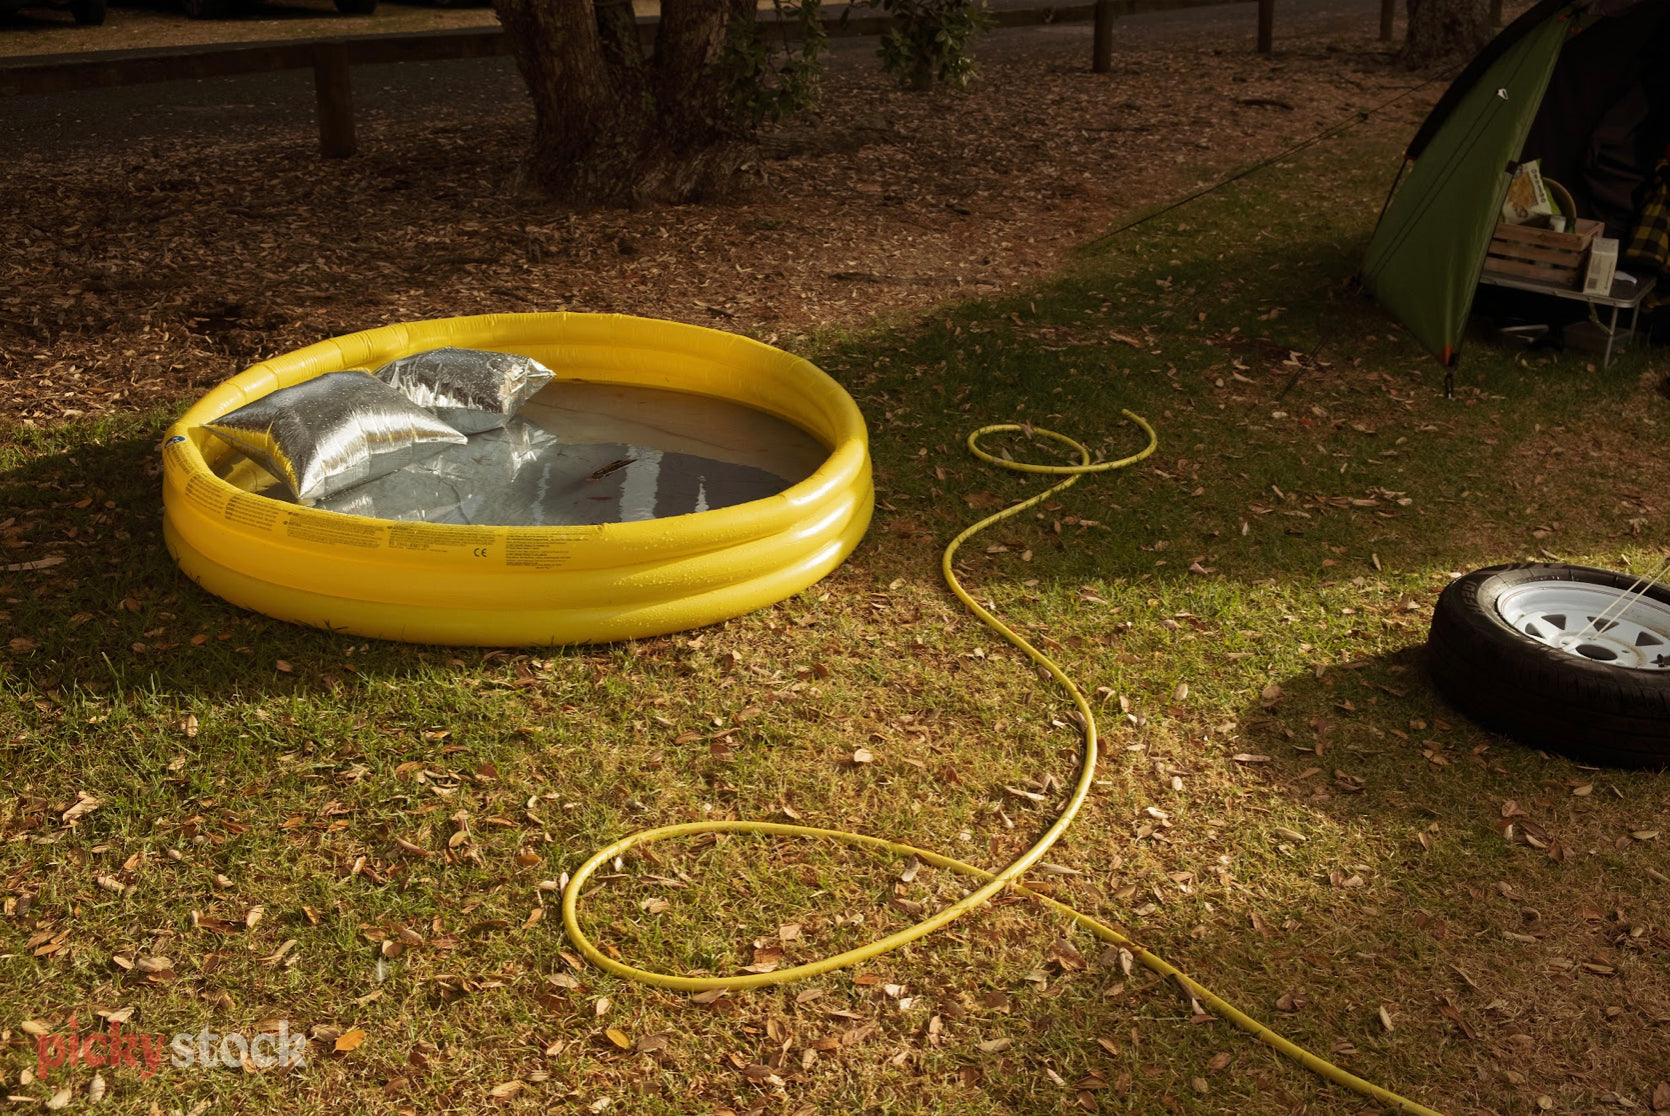 Outdoor bright yellow plastic blow-up paddling pool sits on yellow-tinted grass, with a yellow hose spiralling through the frame. 